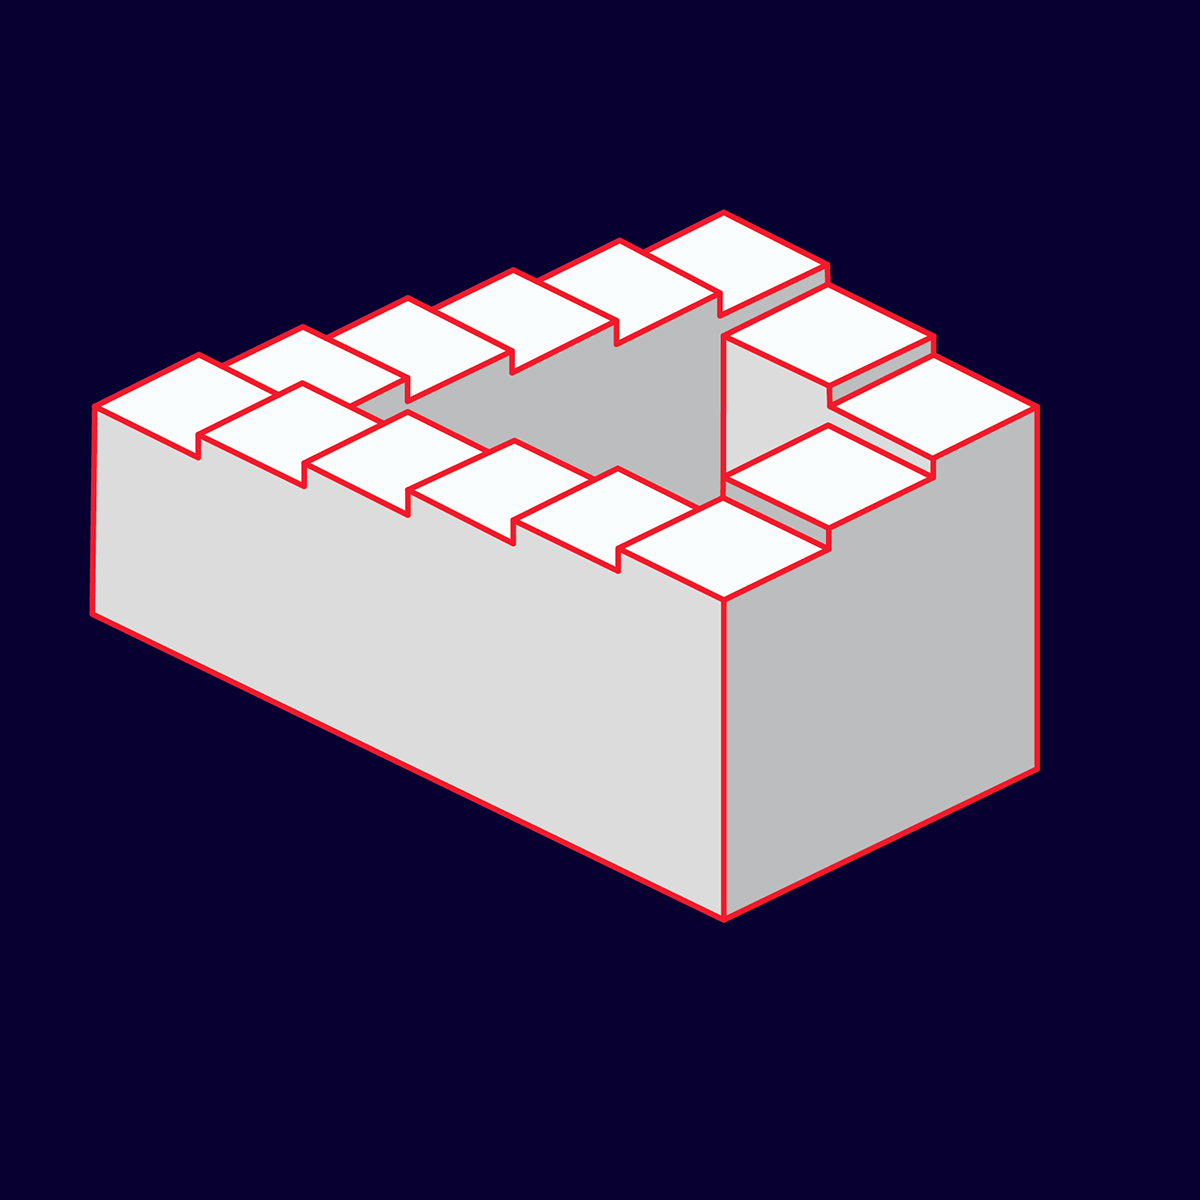 penrose Impossible object